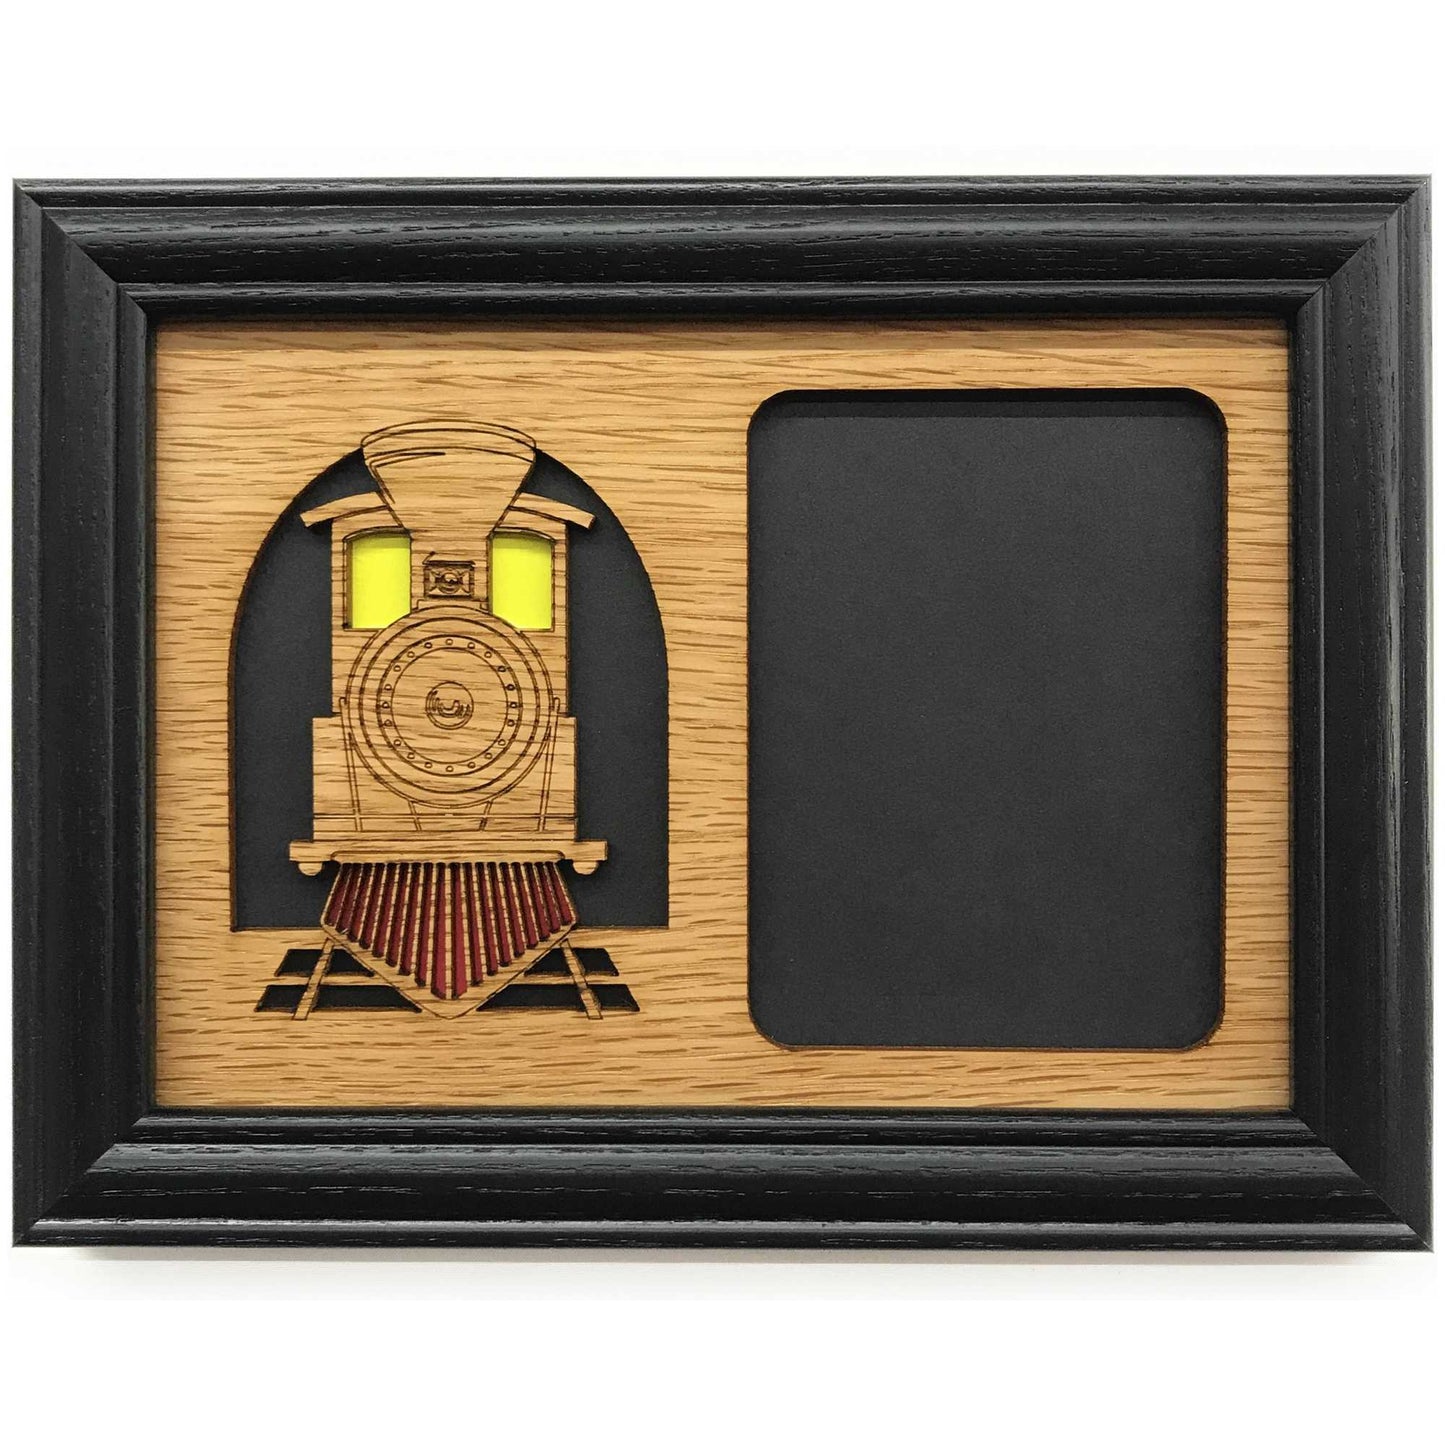 Train Picture Frame - 5x7 Frame Holds 3x4 Photo